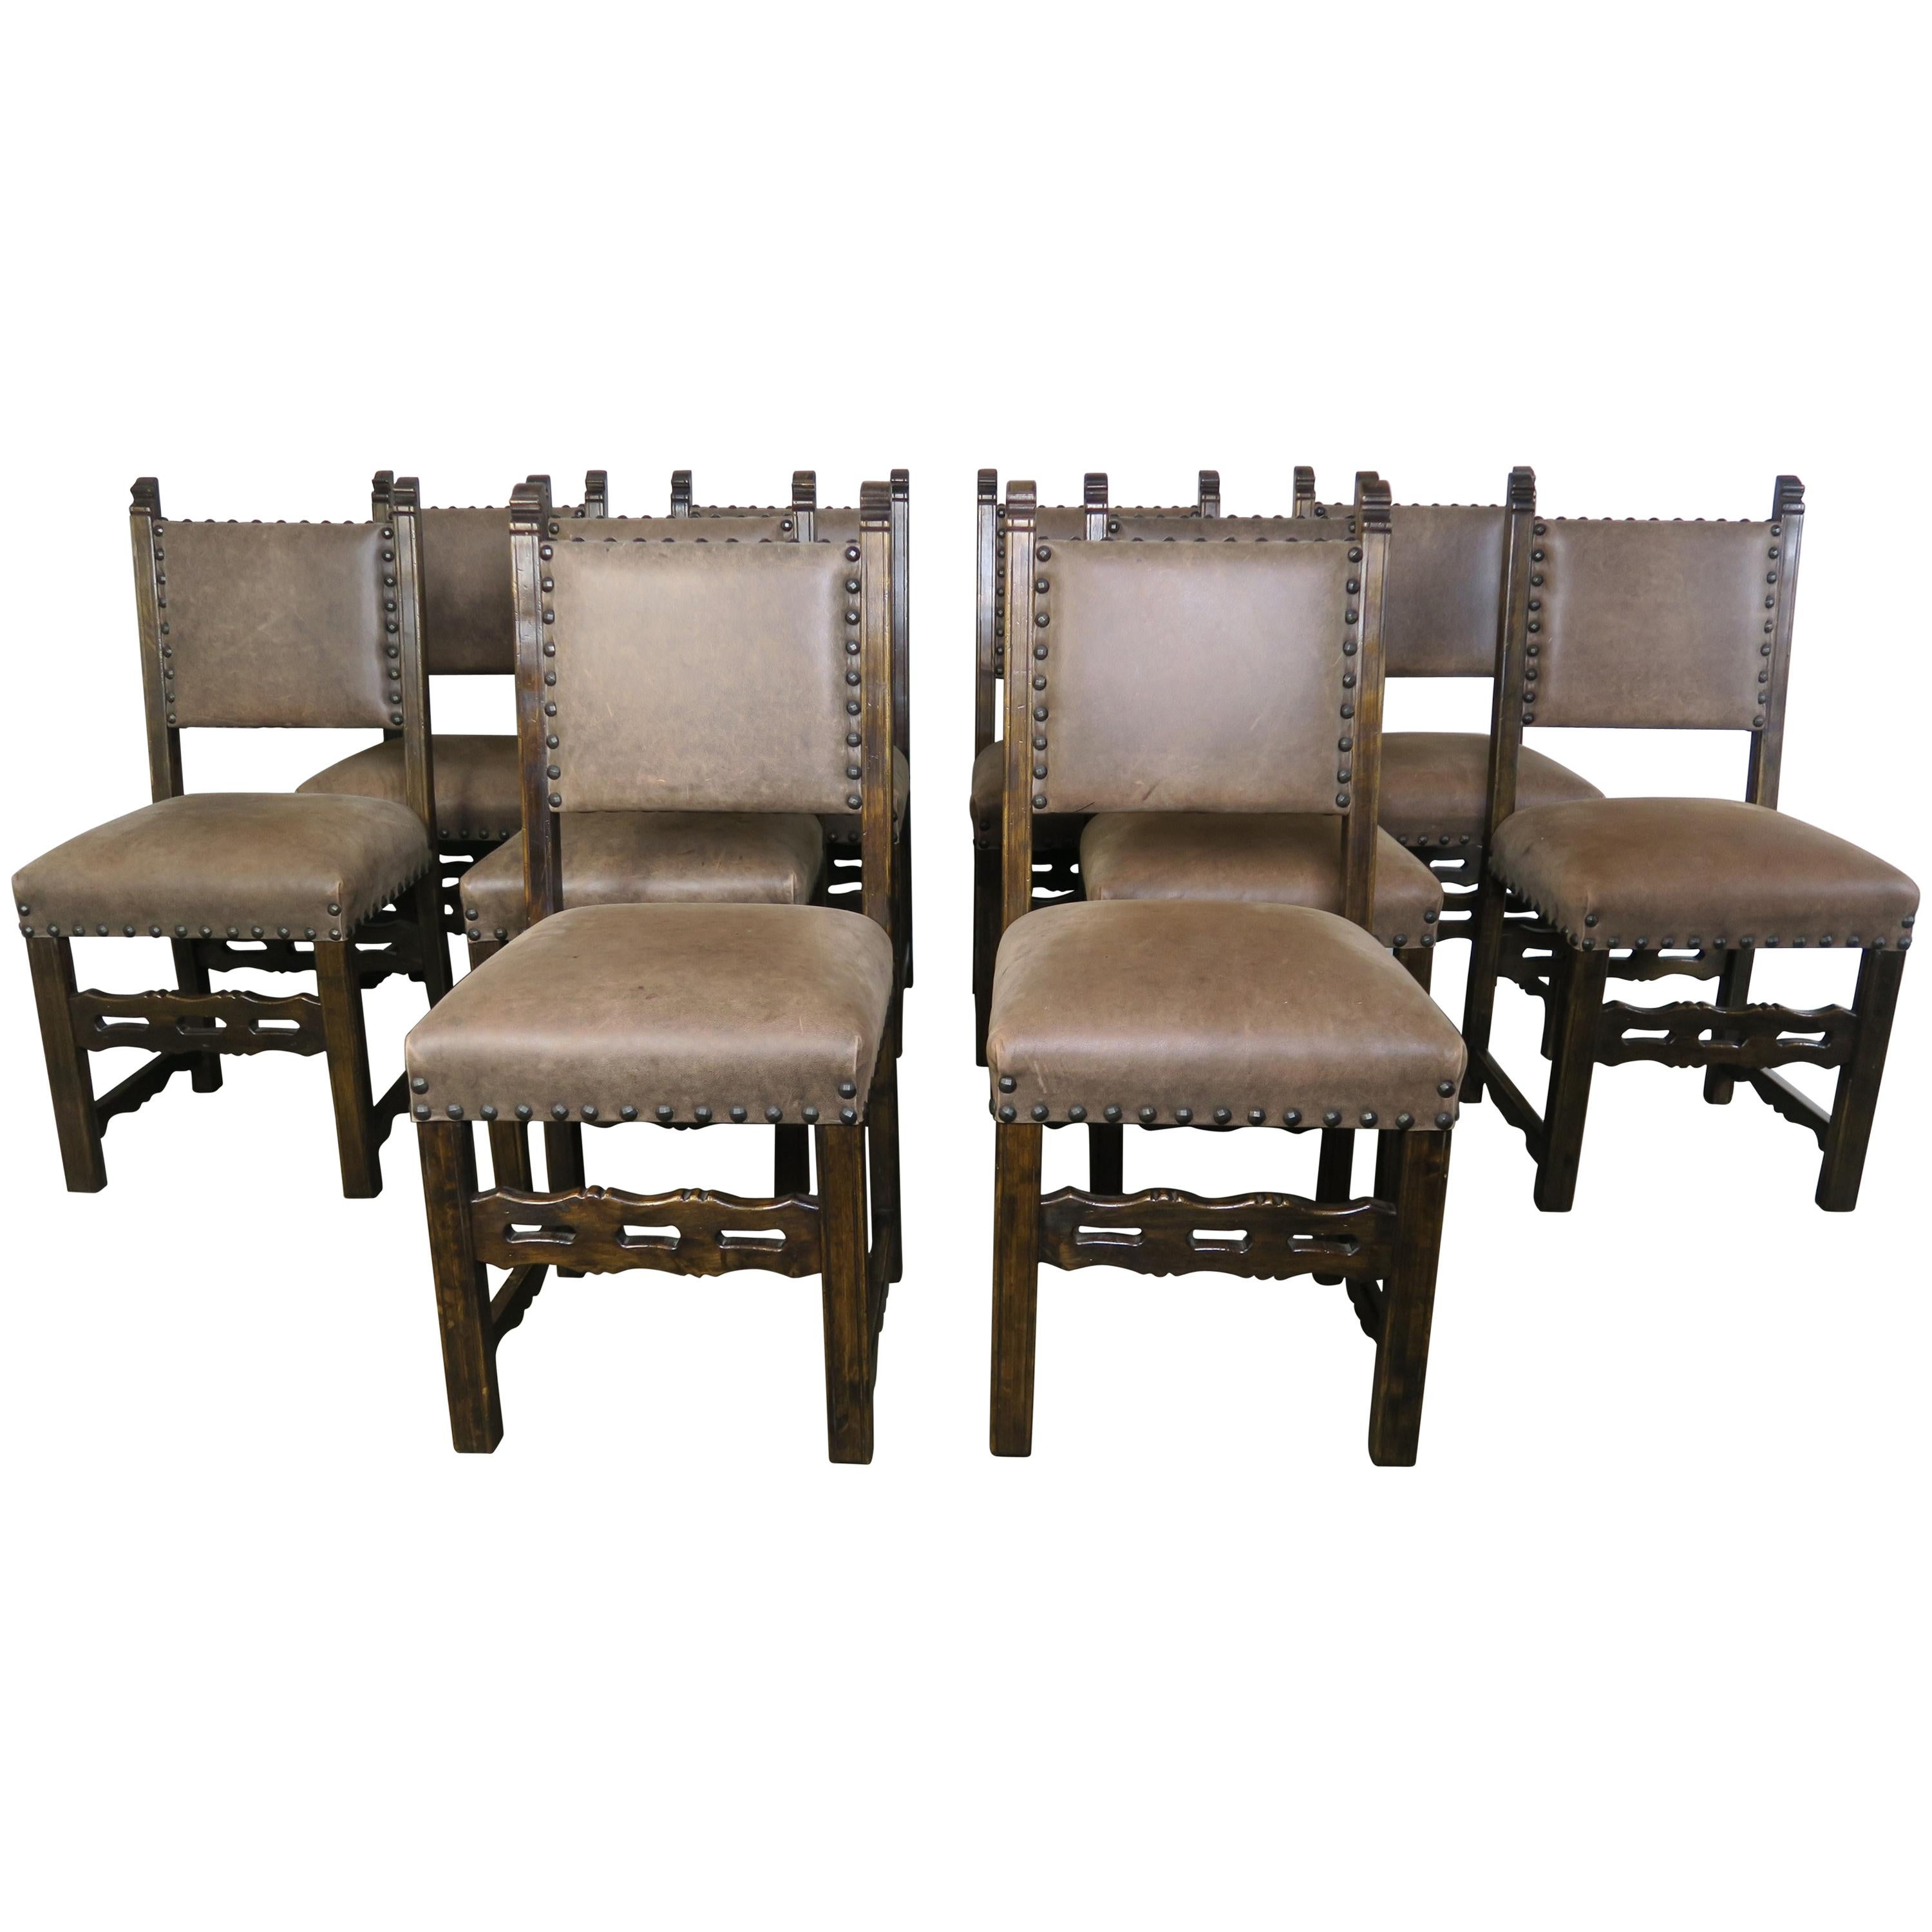 Set of Ten Spanish Style Leather Dining Chairs